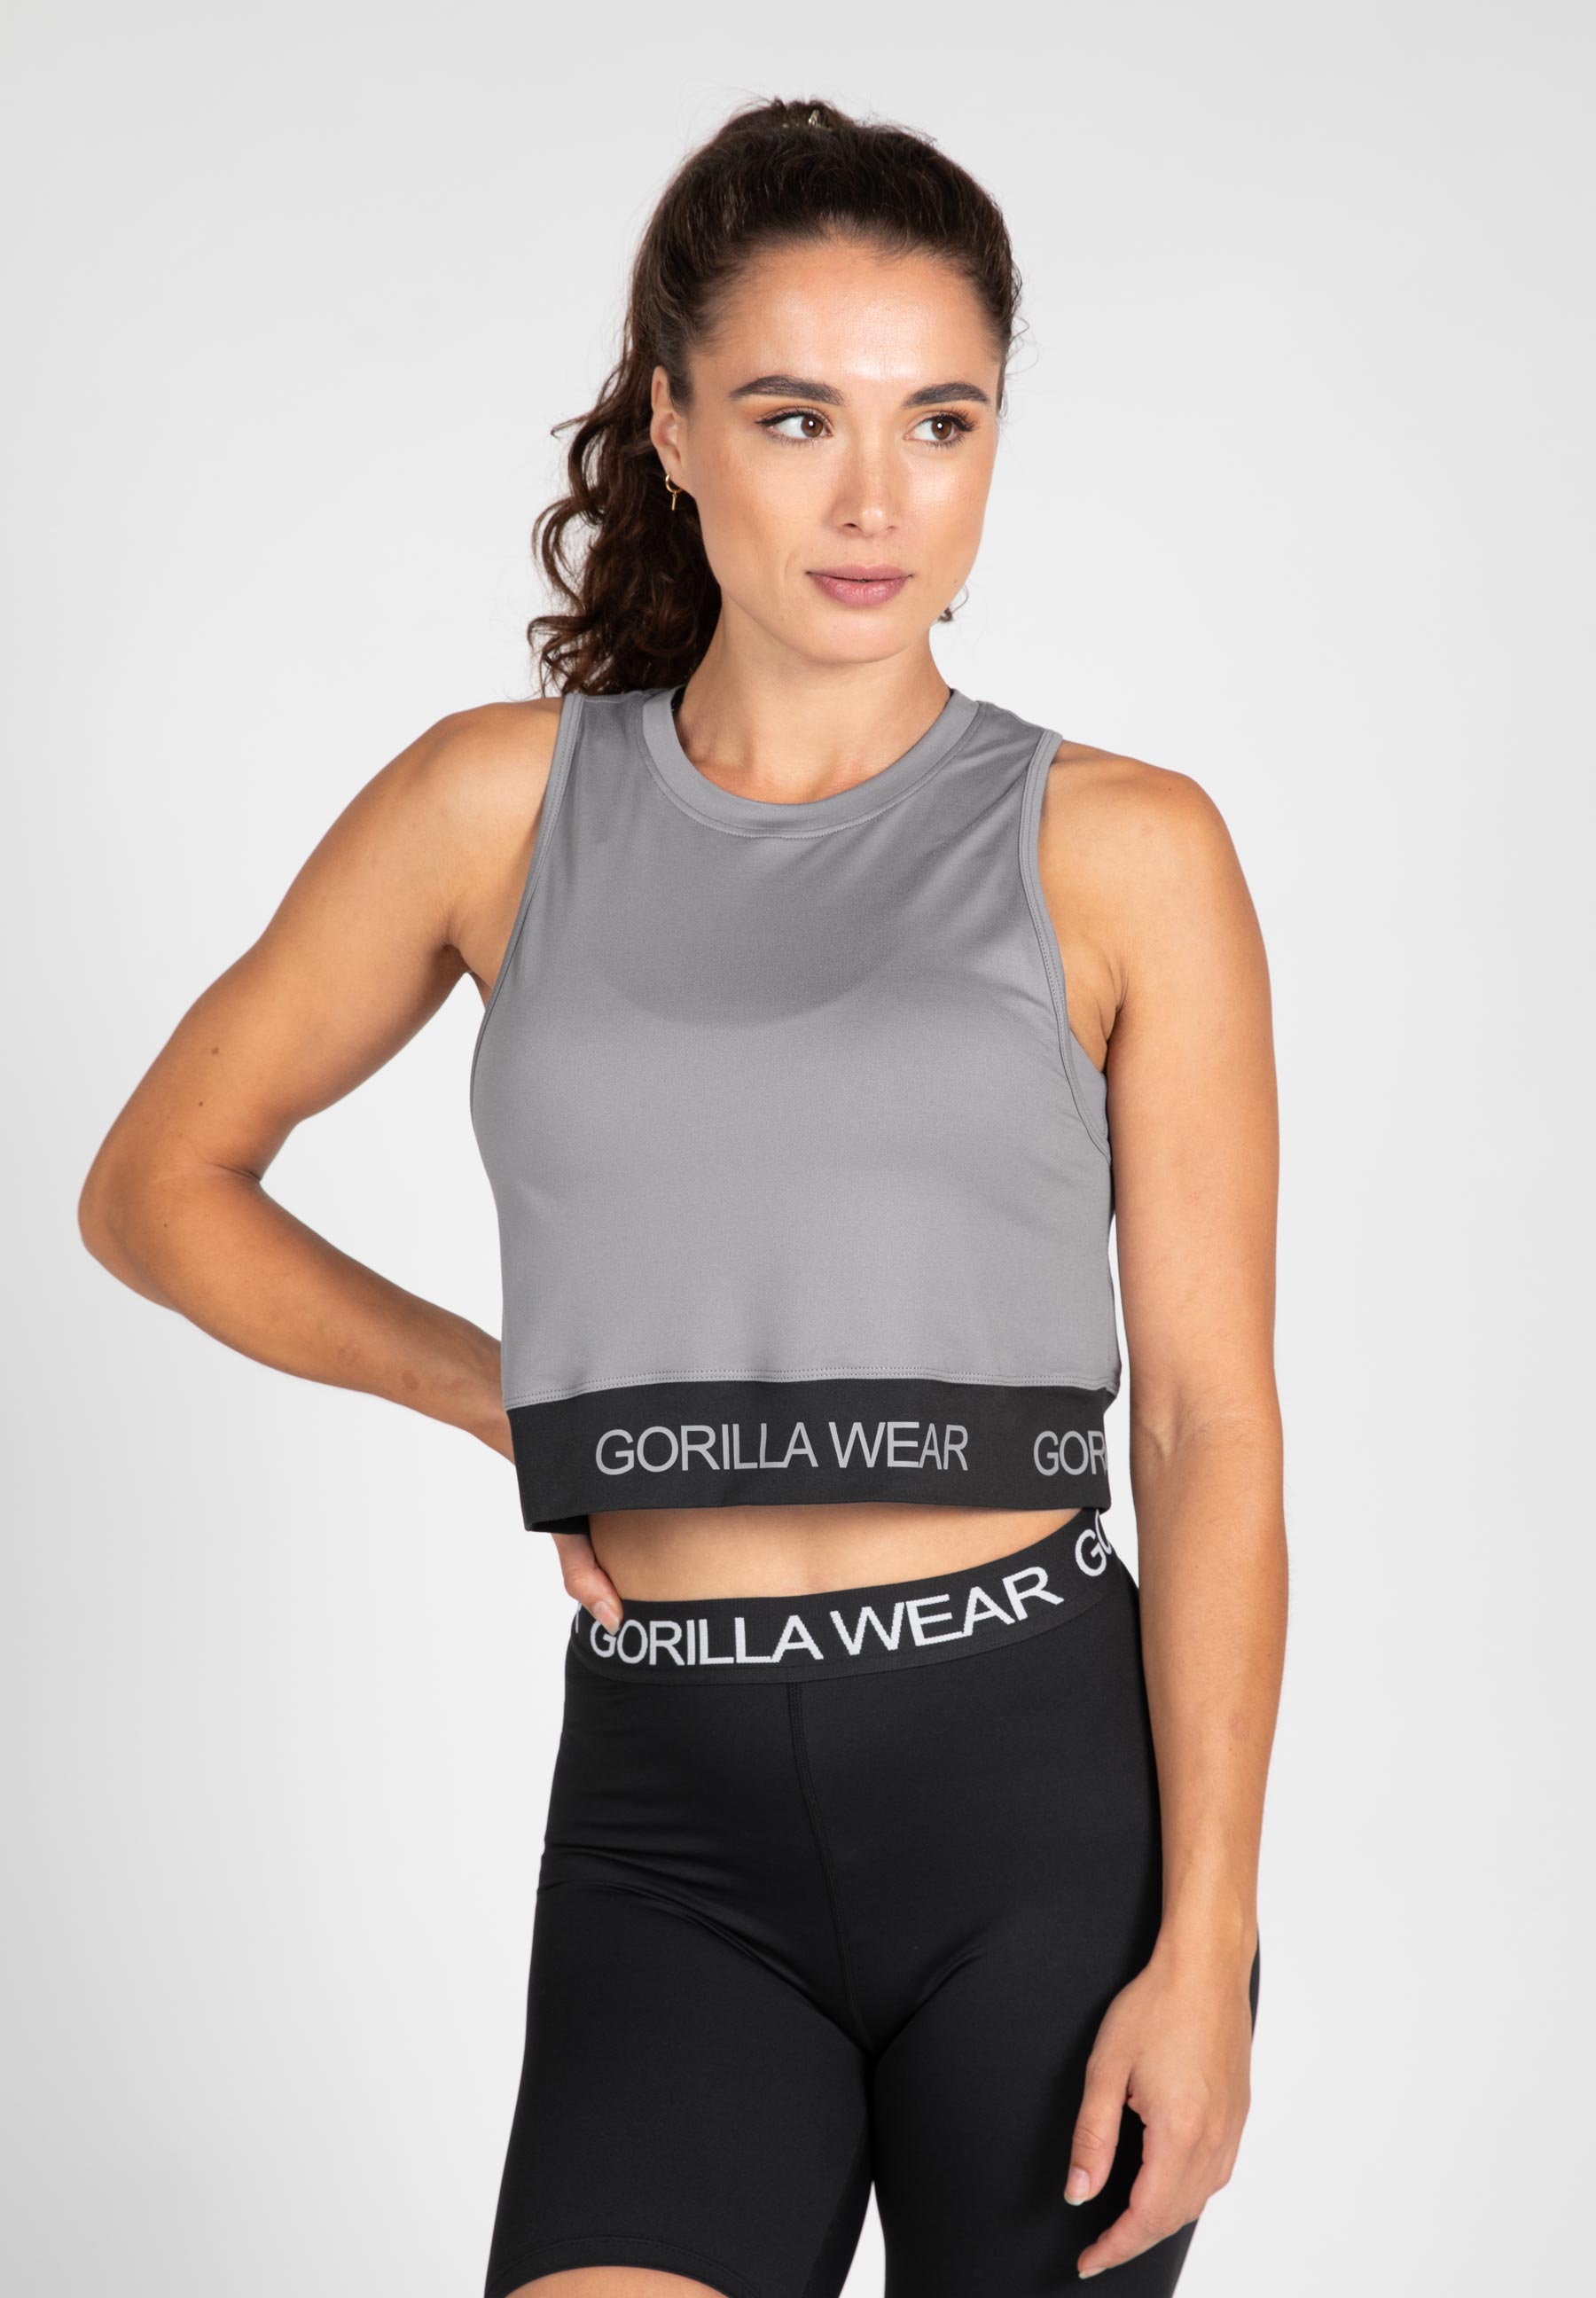 Gorilla Wear Colby Cropped Tank Top - Gray - XL